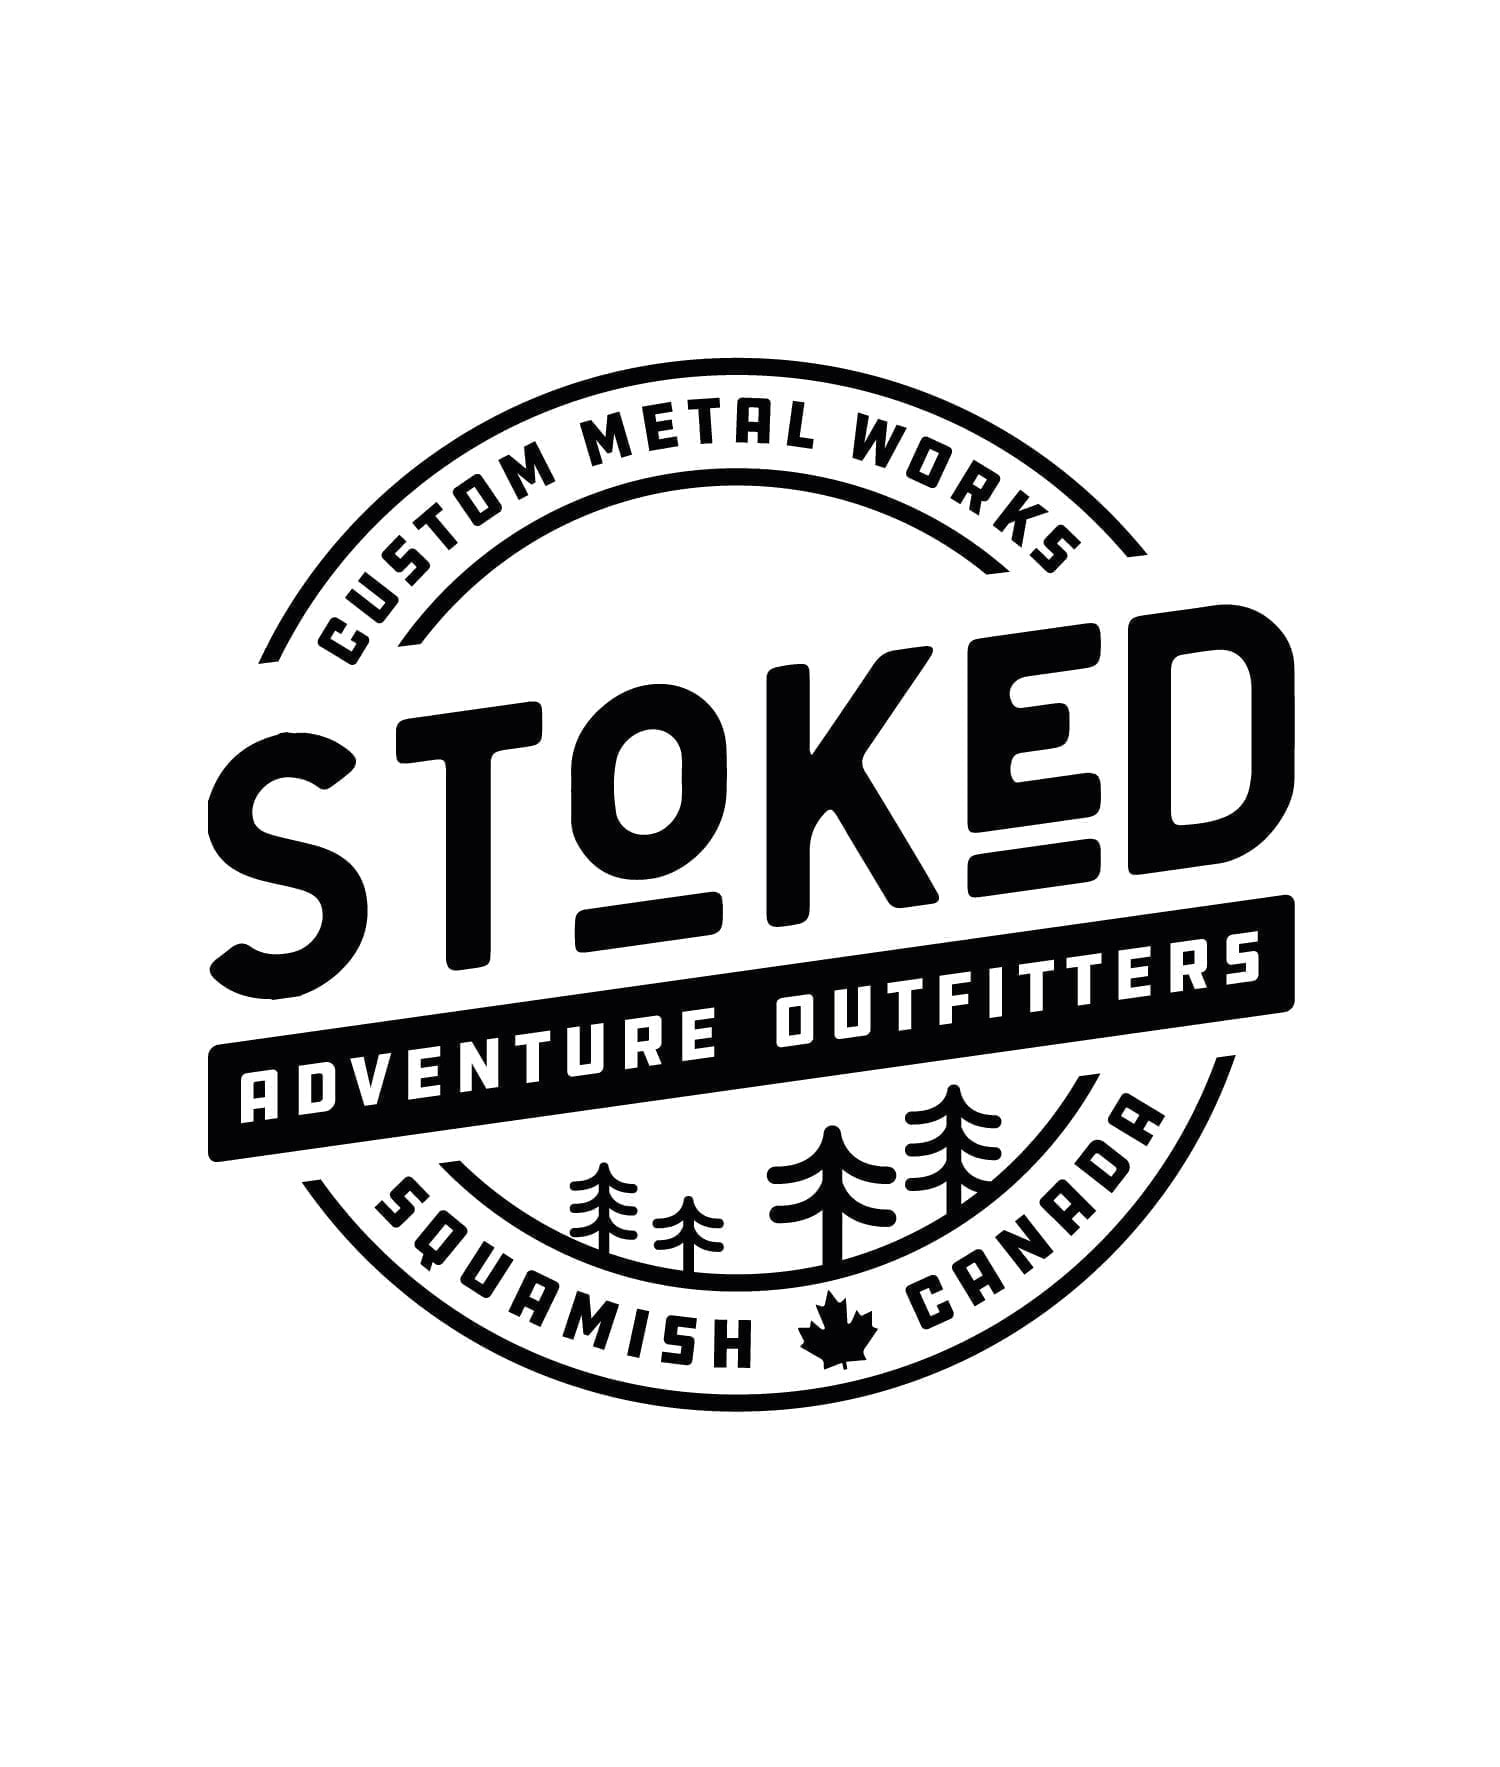 Stoked Adventure Outfitters Ltd. - Vanlife Outfitters